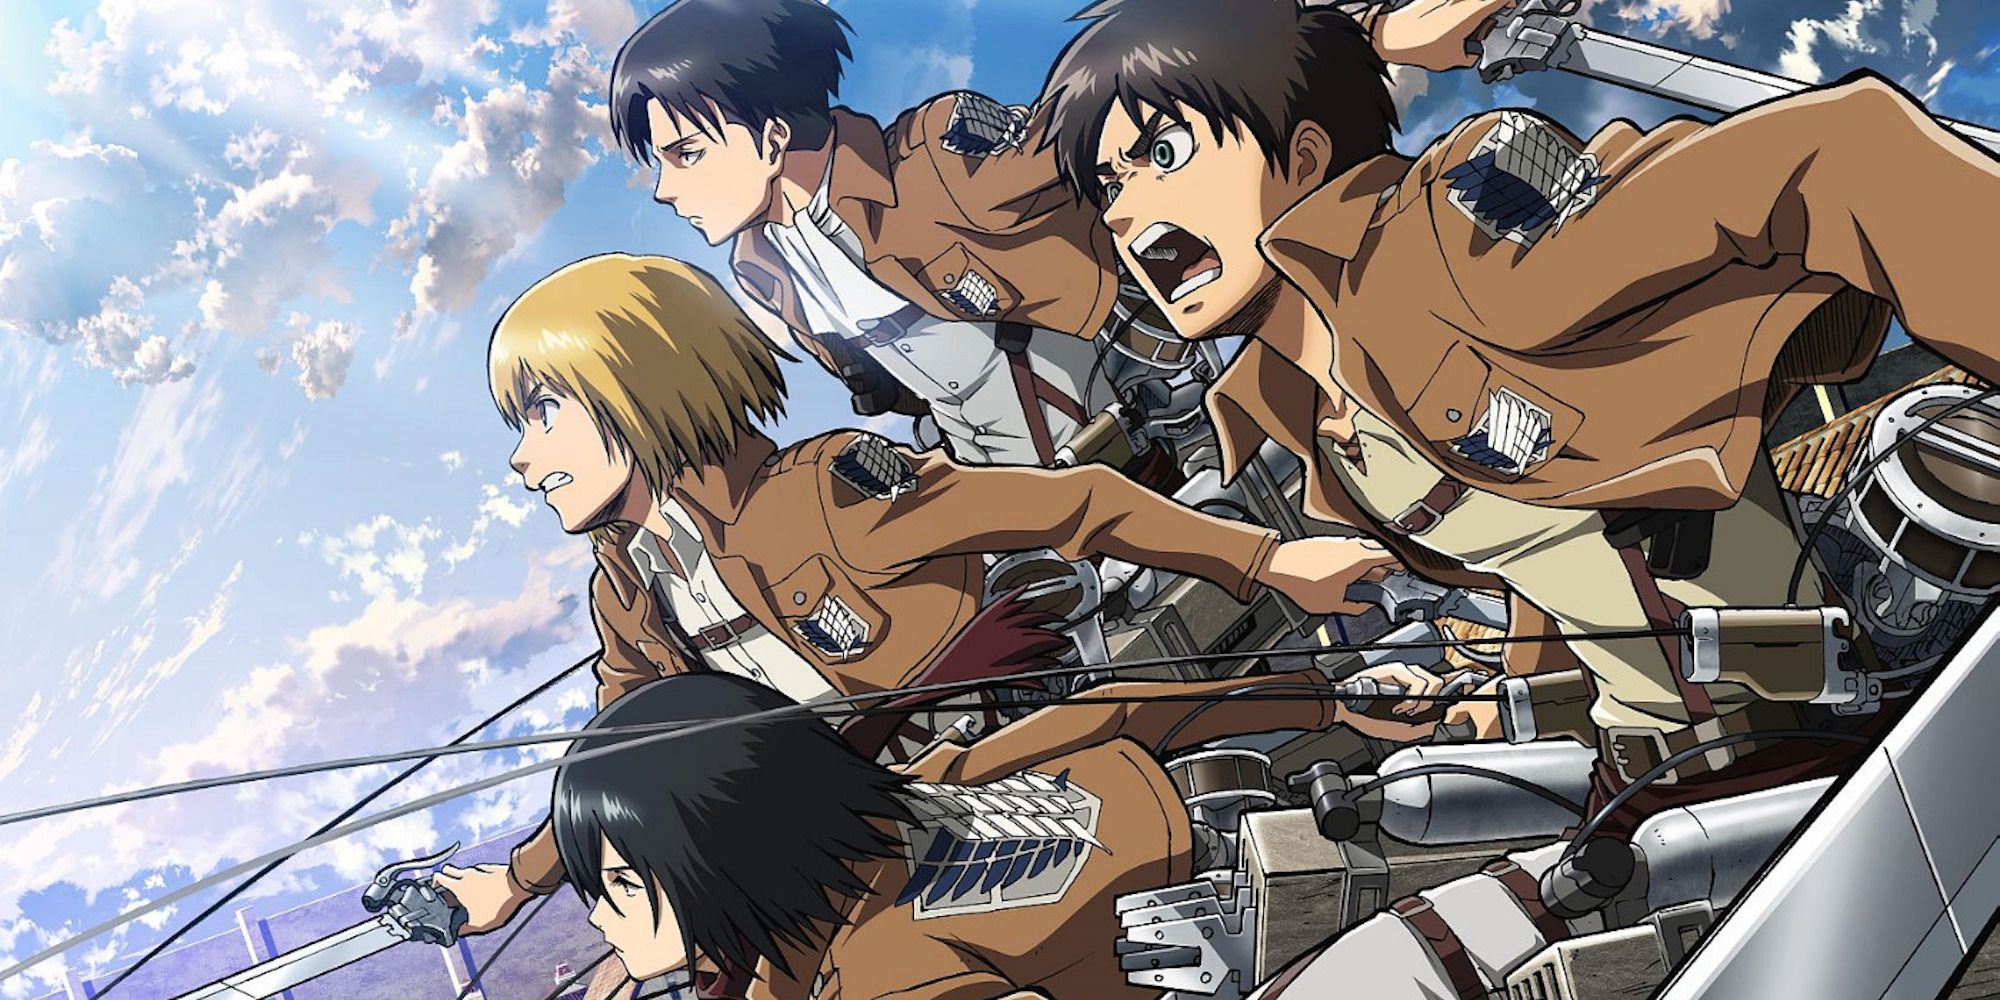 Promo art featuring characters from Attack On Titan